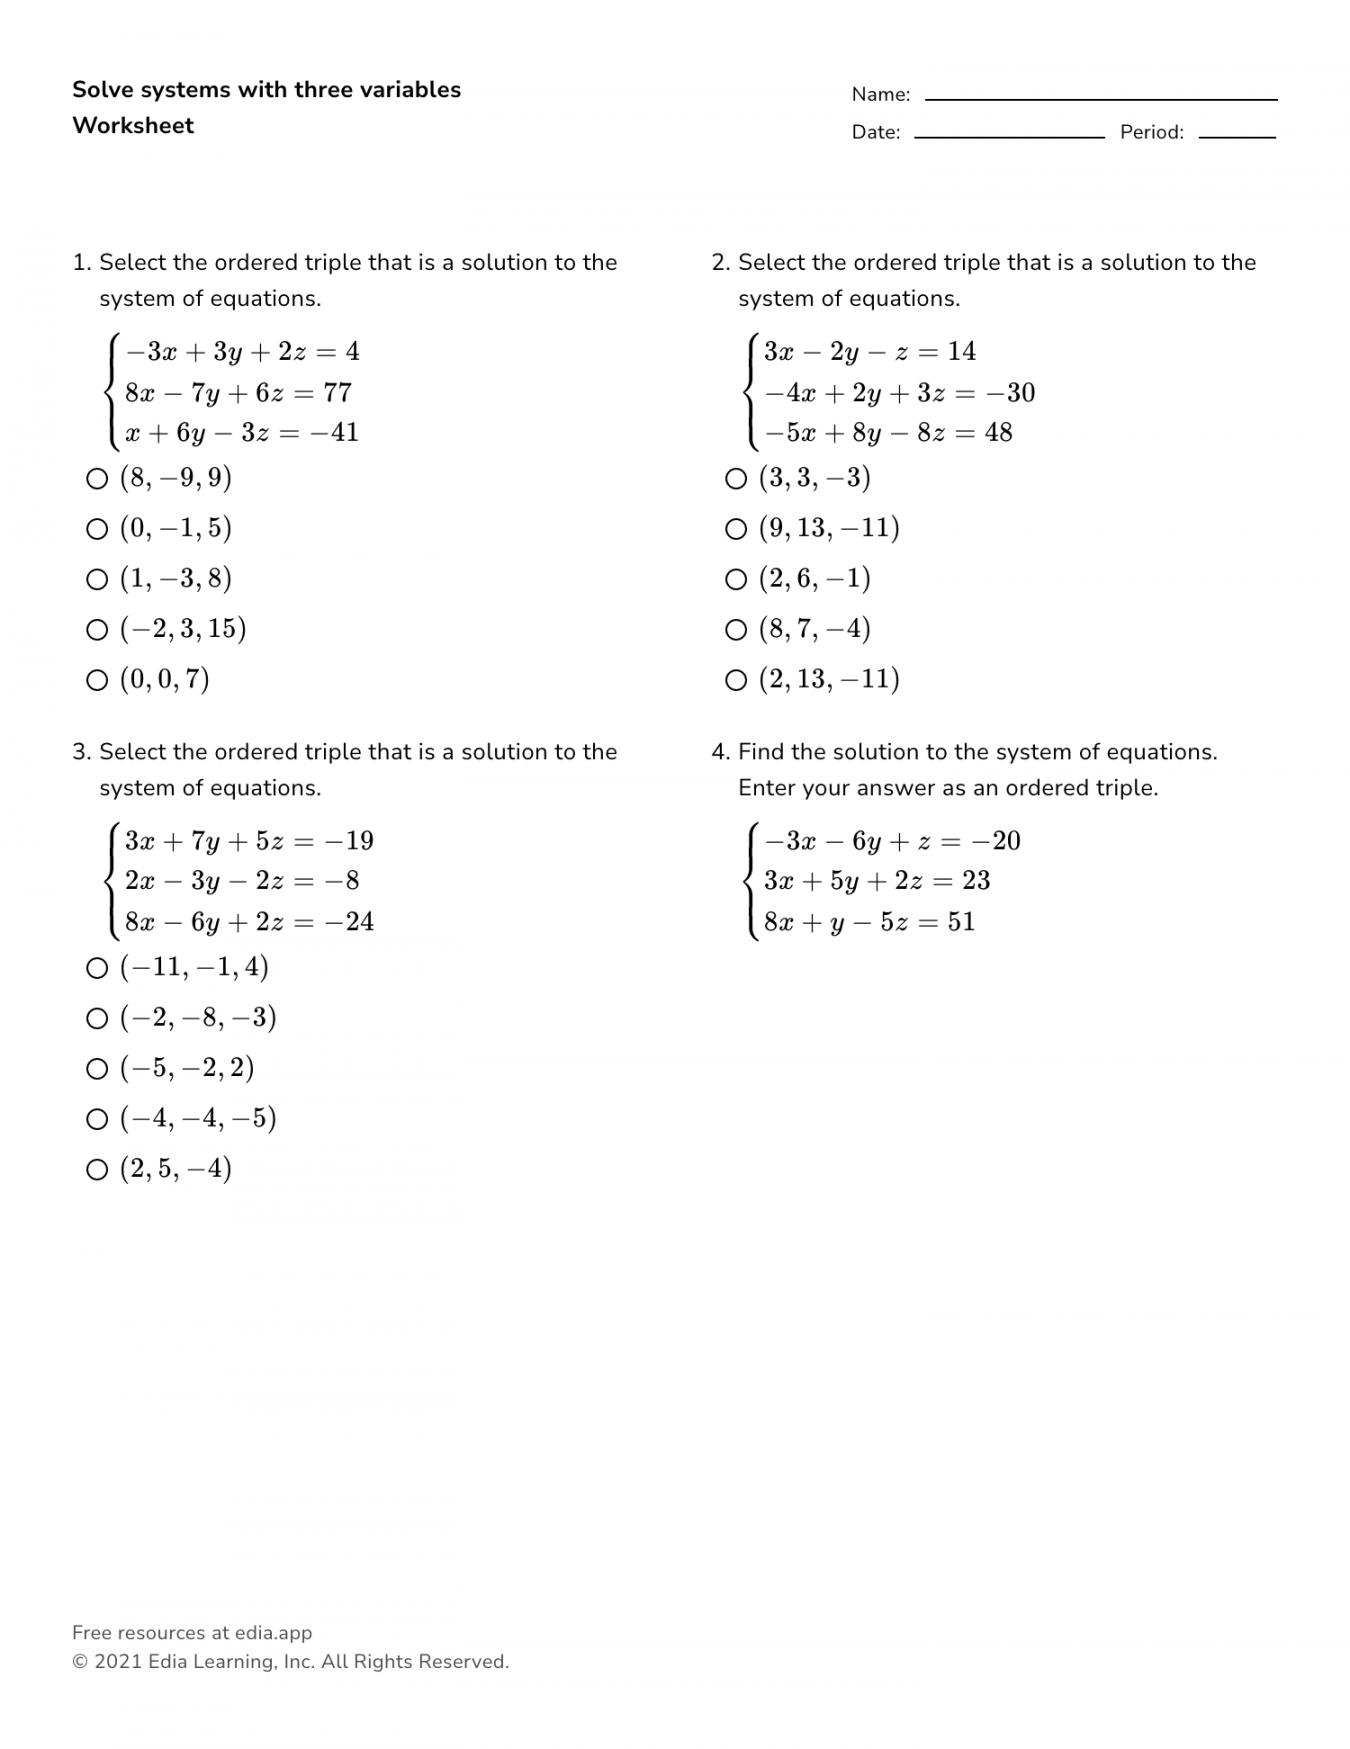 Solve Systems With Three Variables - Worksheet